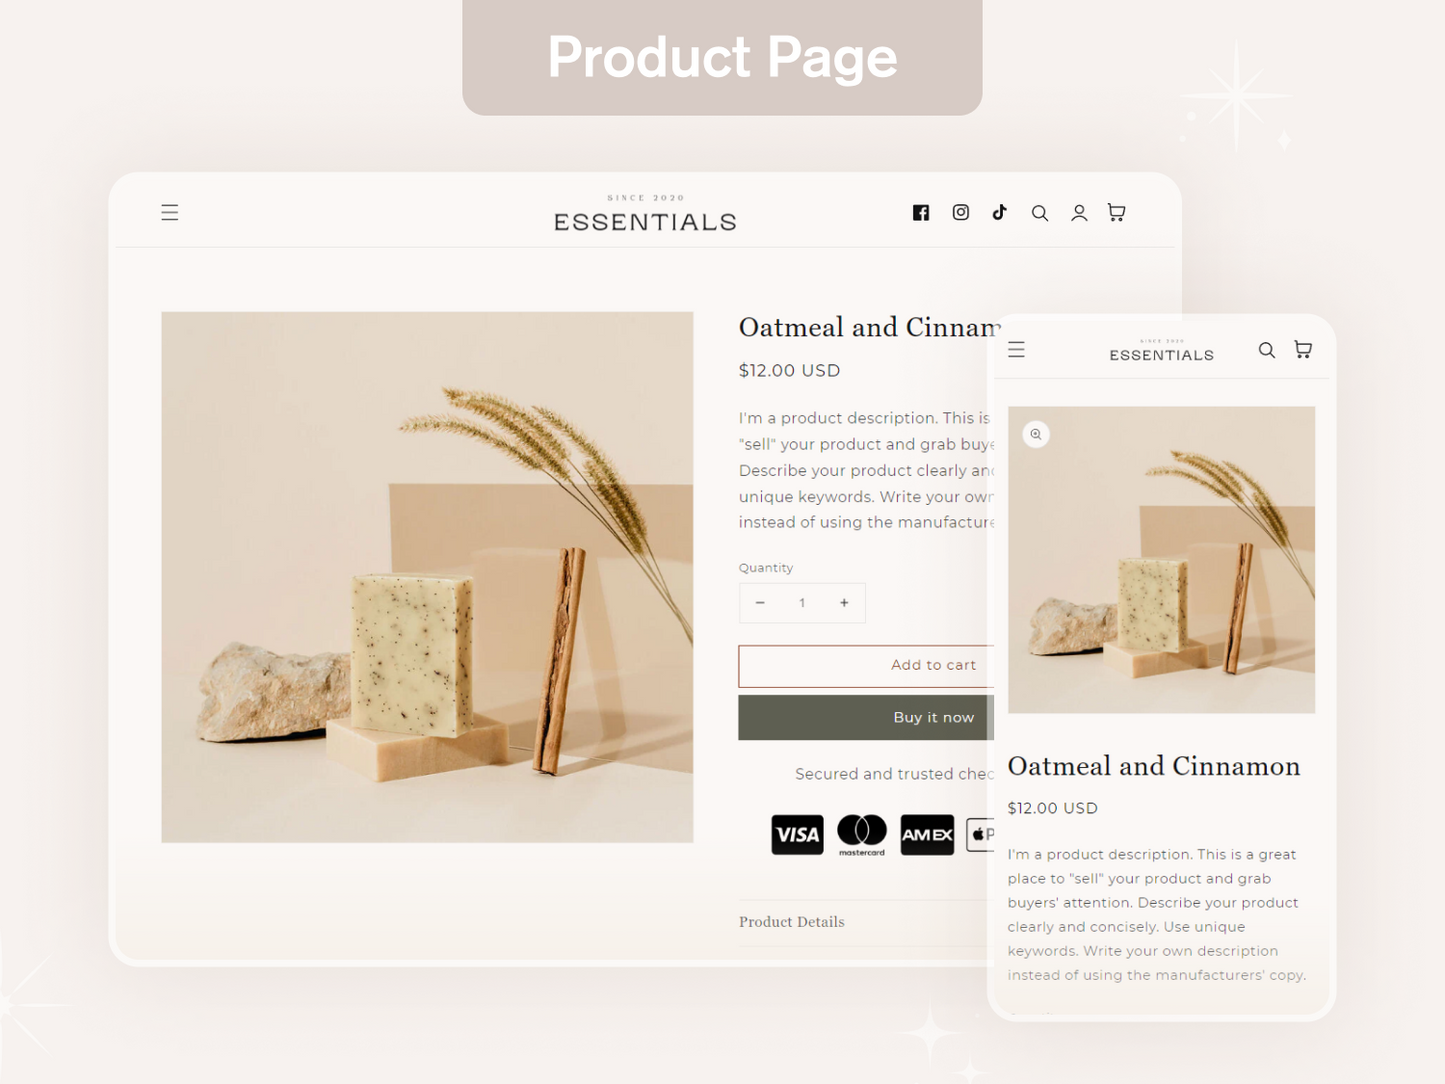 Essentials - Health & Beauty Shopify Theme